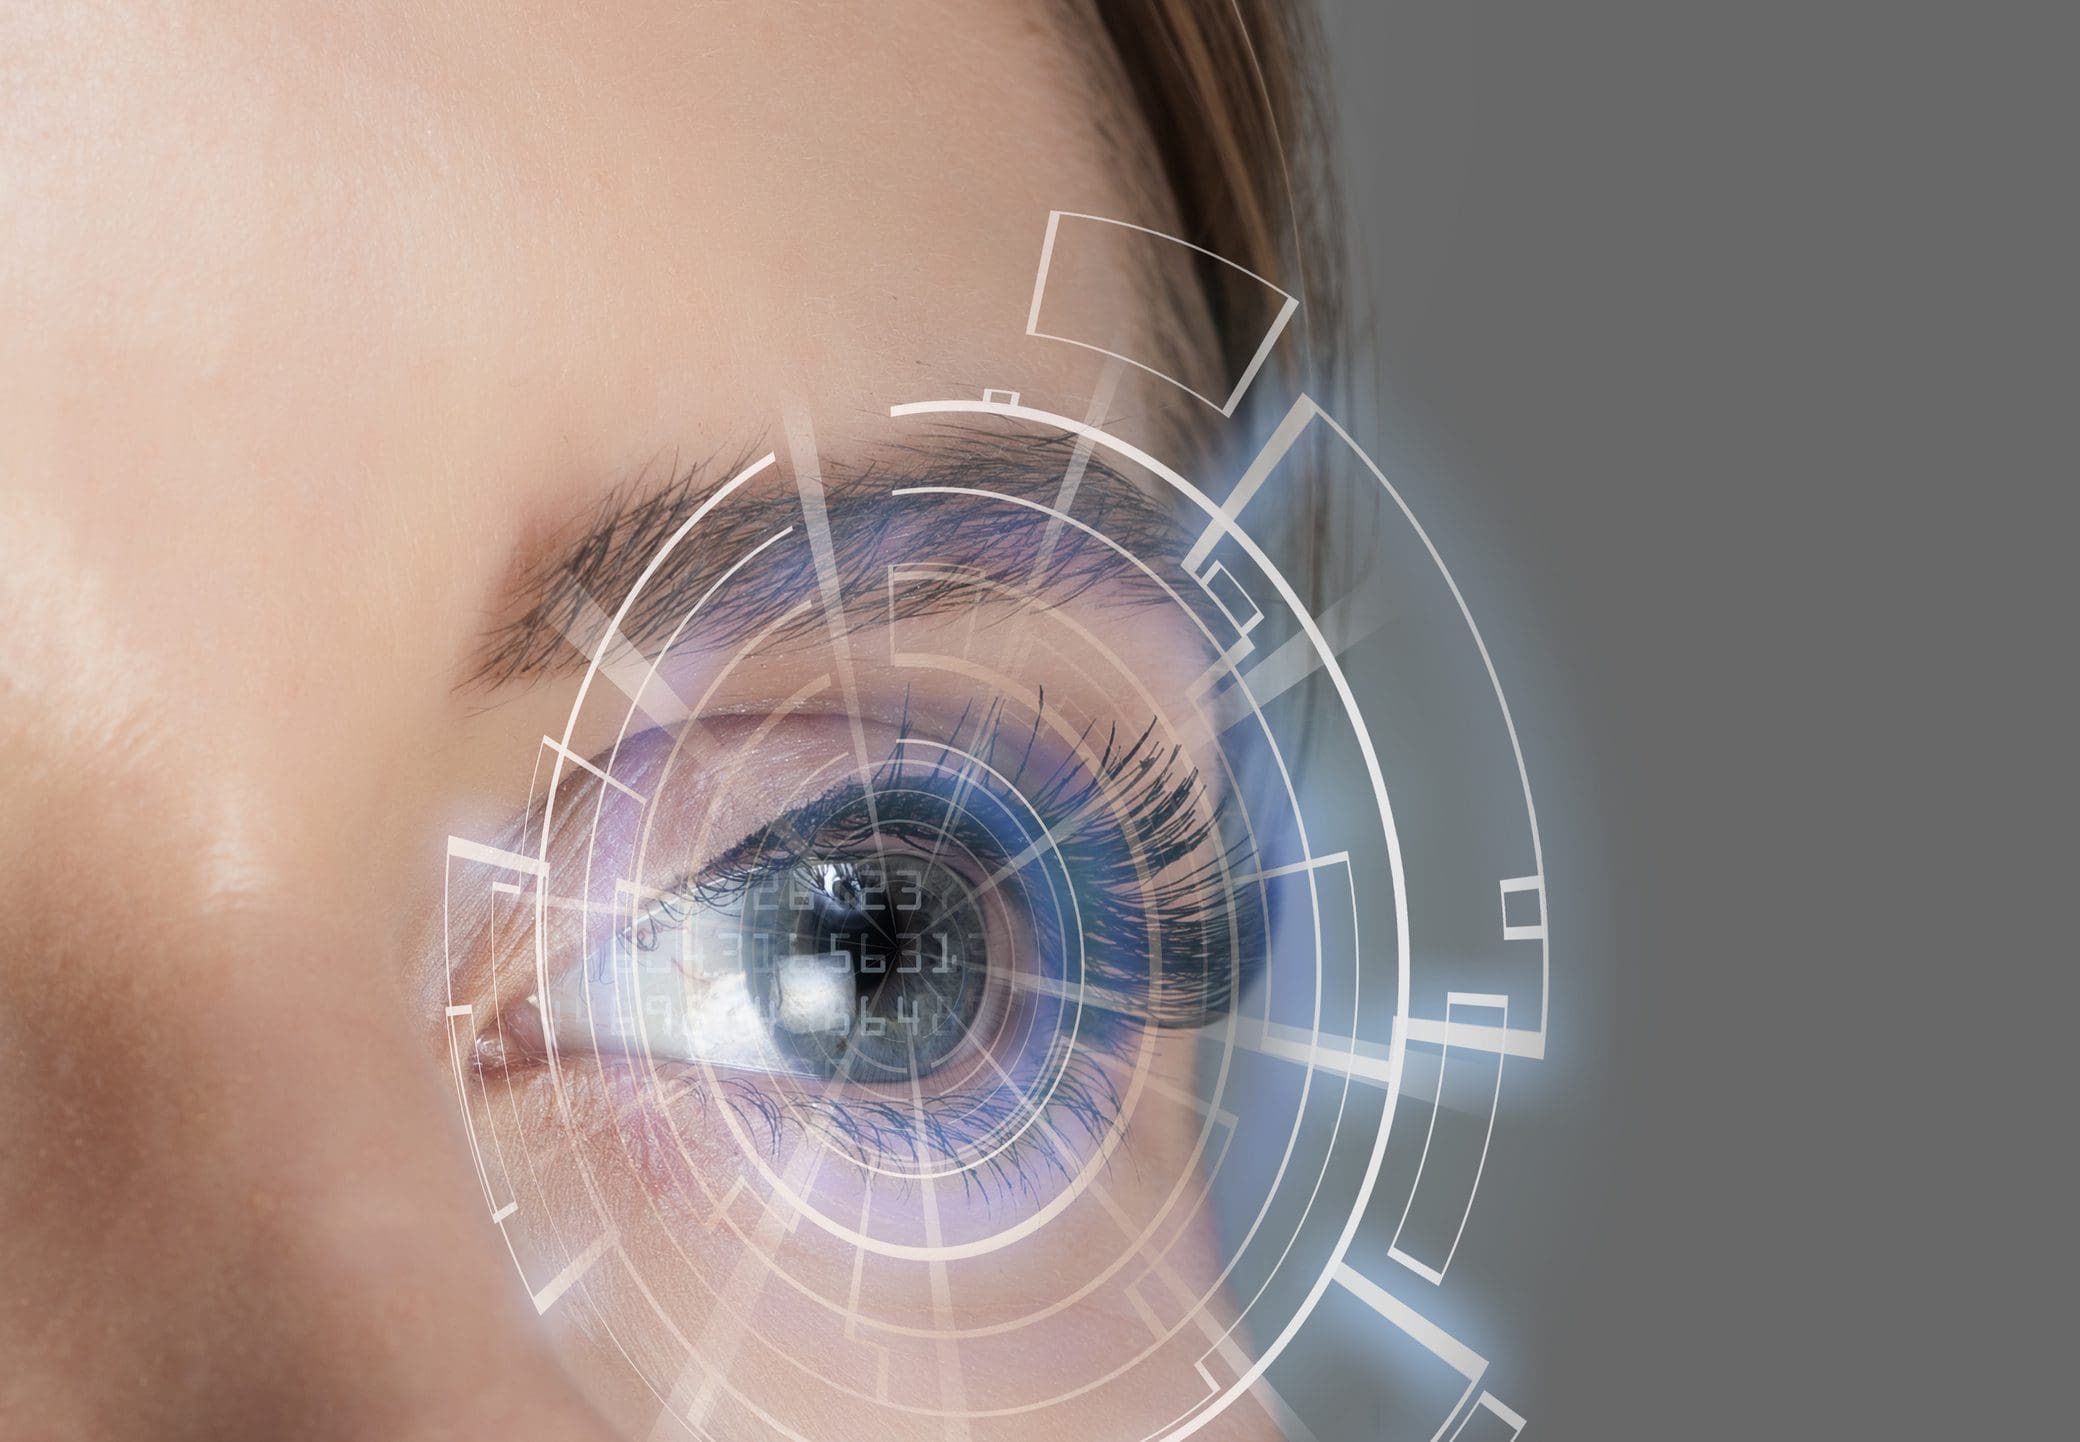 Proposed components of Bionic contact lens